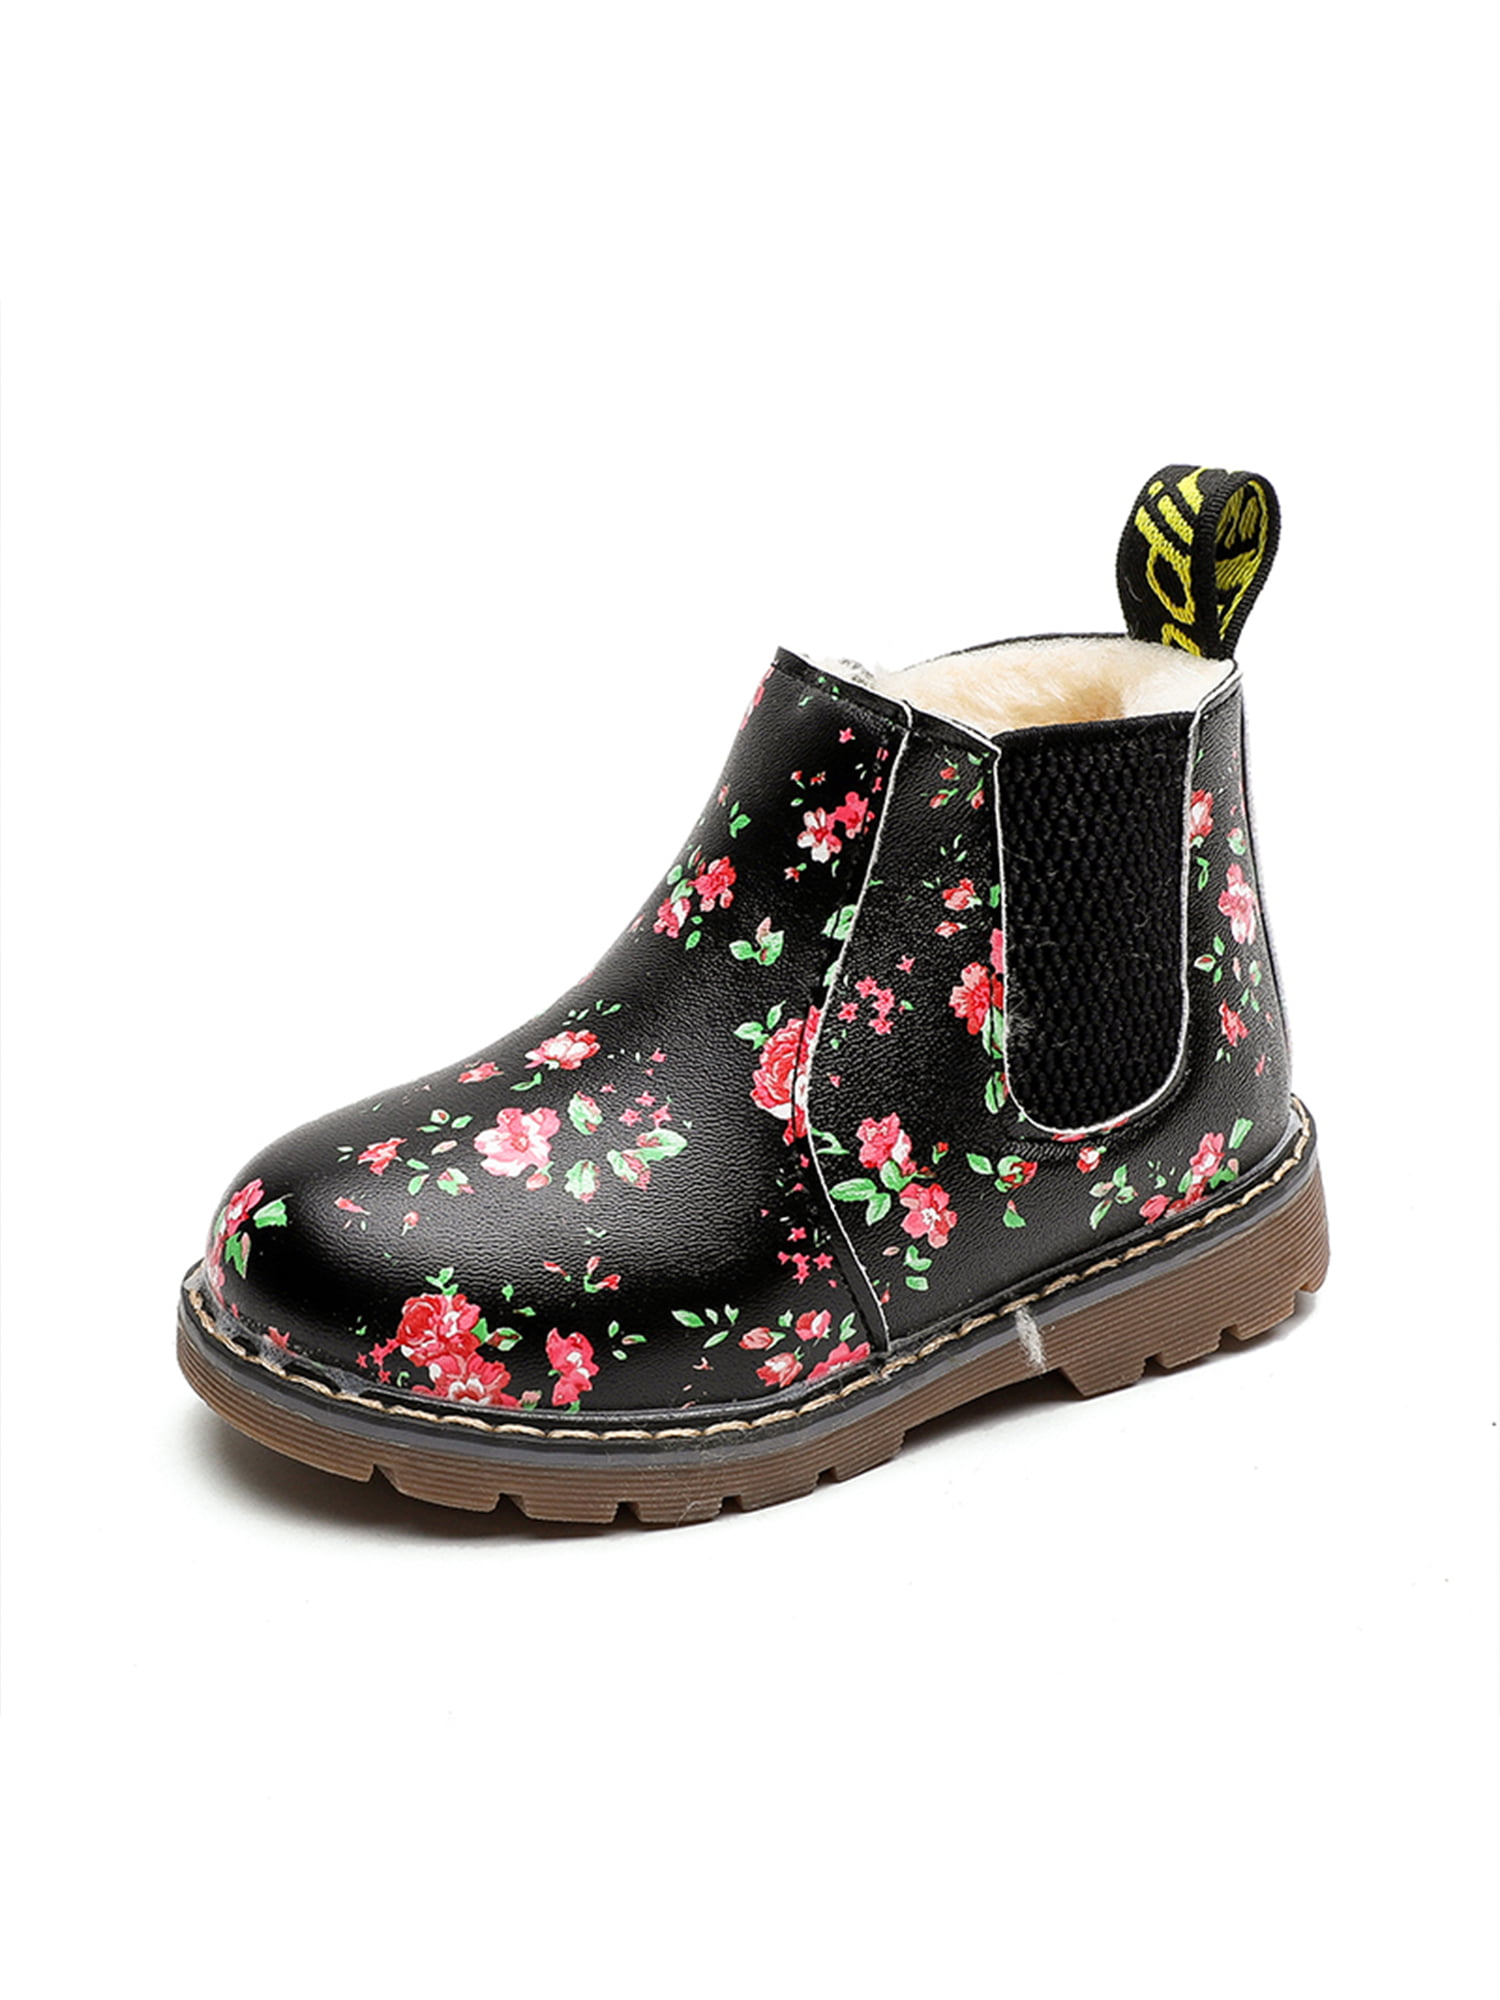 Girls Ankle Boots Girls Fashion Boots Girls Floral Print Boots Girls Boots Zip